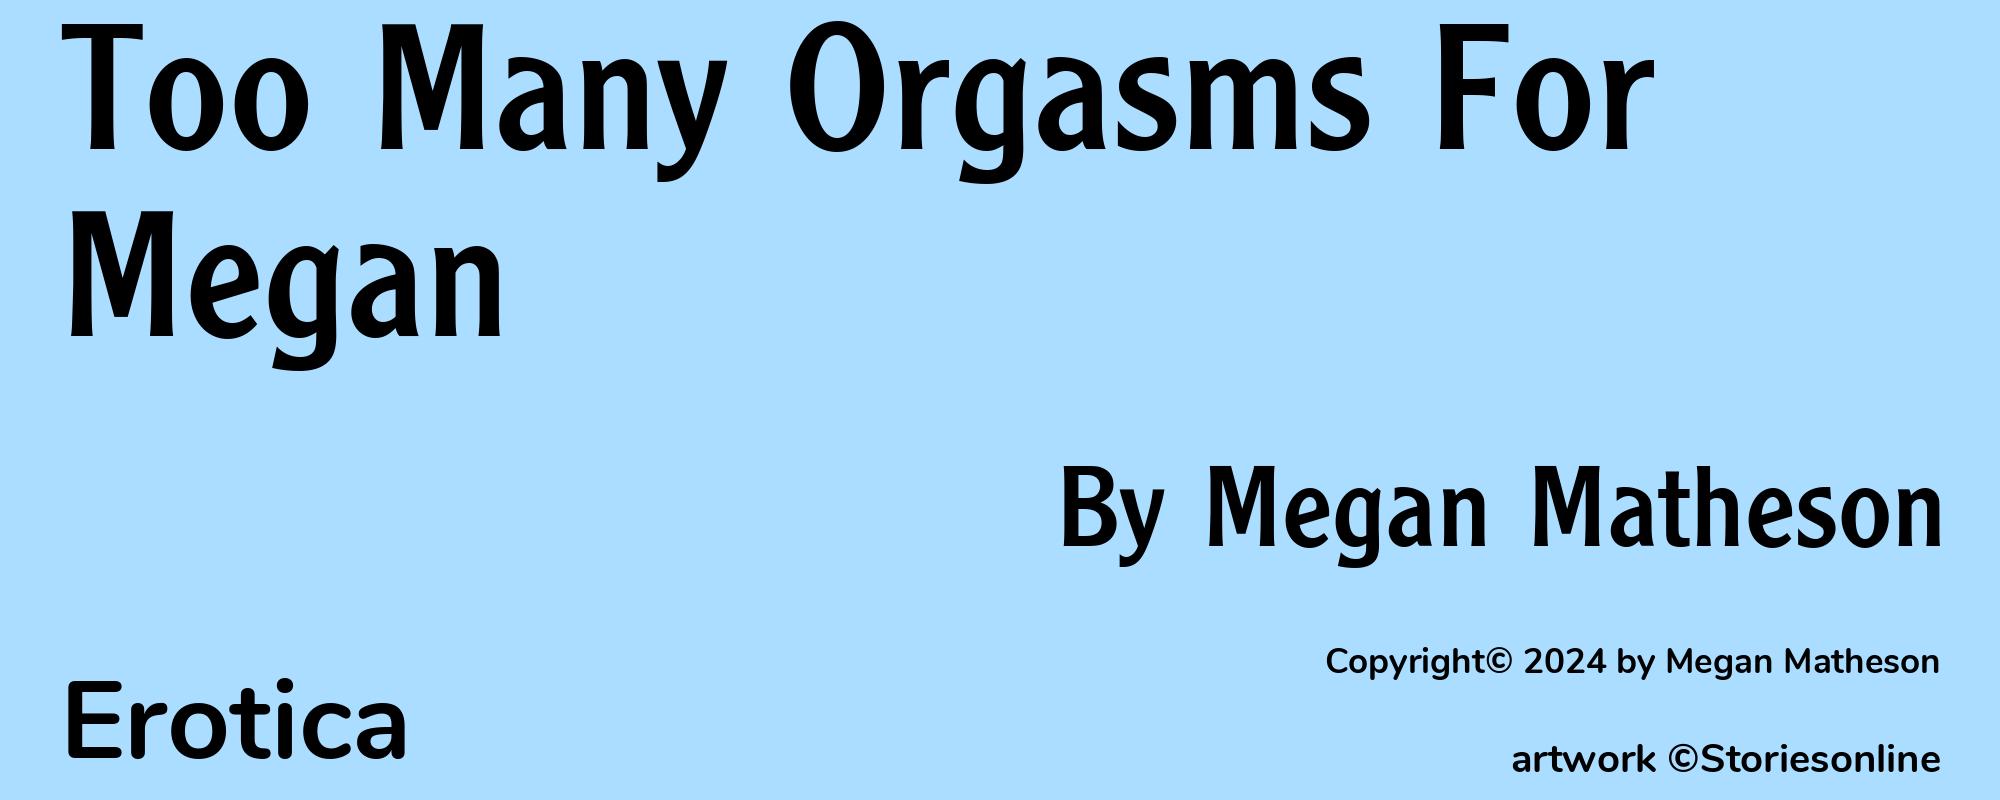 Too Many Orgasms For Megan - Cover